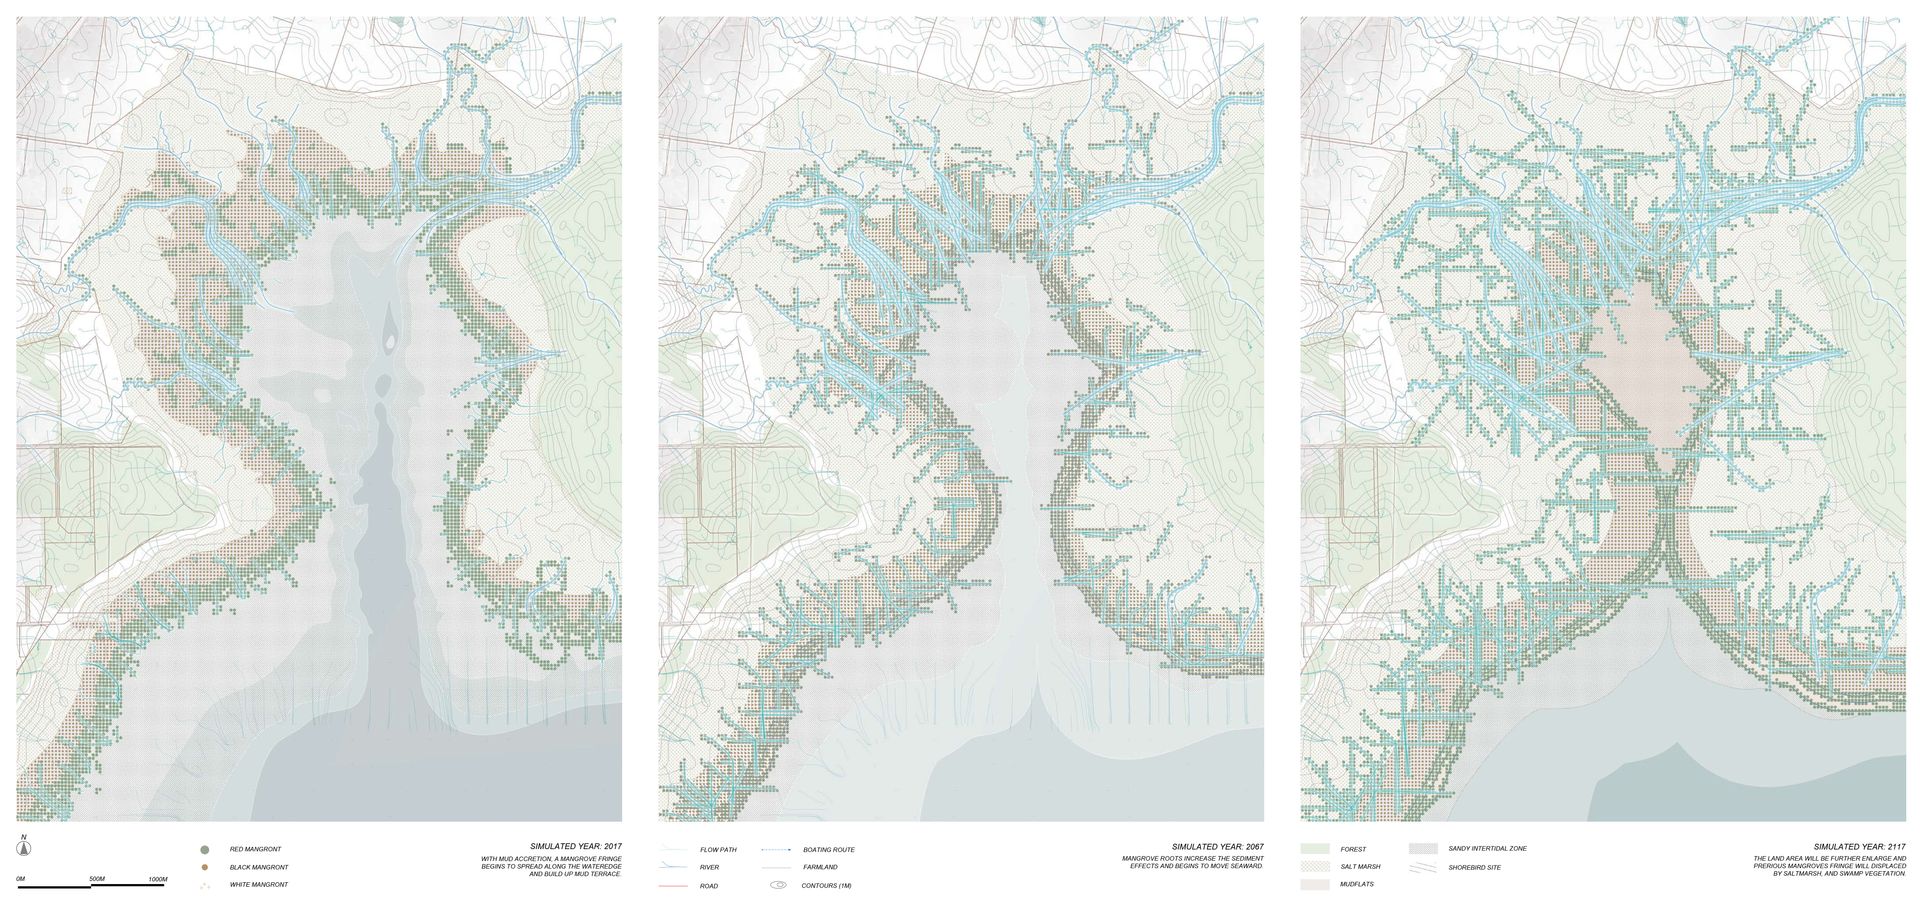 A trio of maps of a coastline, showing the spread of mangrove vegetation and the flows of water that enable it ^caption: The maps show how generalisable parametric techniques — in this case a method for simulating surface water flows and vegetation spread - can be used to model the evolving conditions of a mangrove wetland system. After developing this parametric model Sharon then used it to test design interventions using the parameters available for simulating different time periods and the effects of various interventions, such as upstream improvements to sediment flows and water quality or improved maintenance regimes that promote re-vegetation